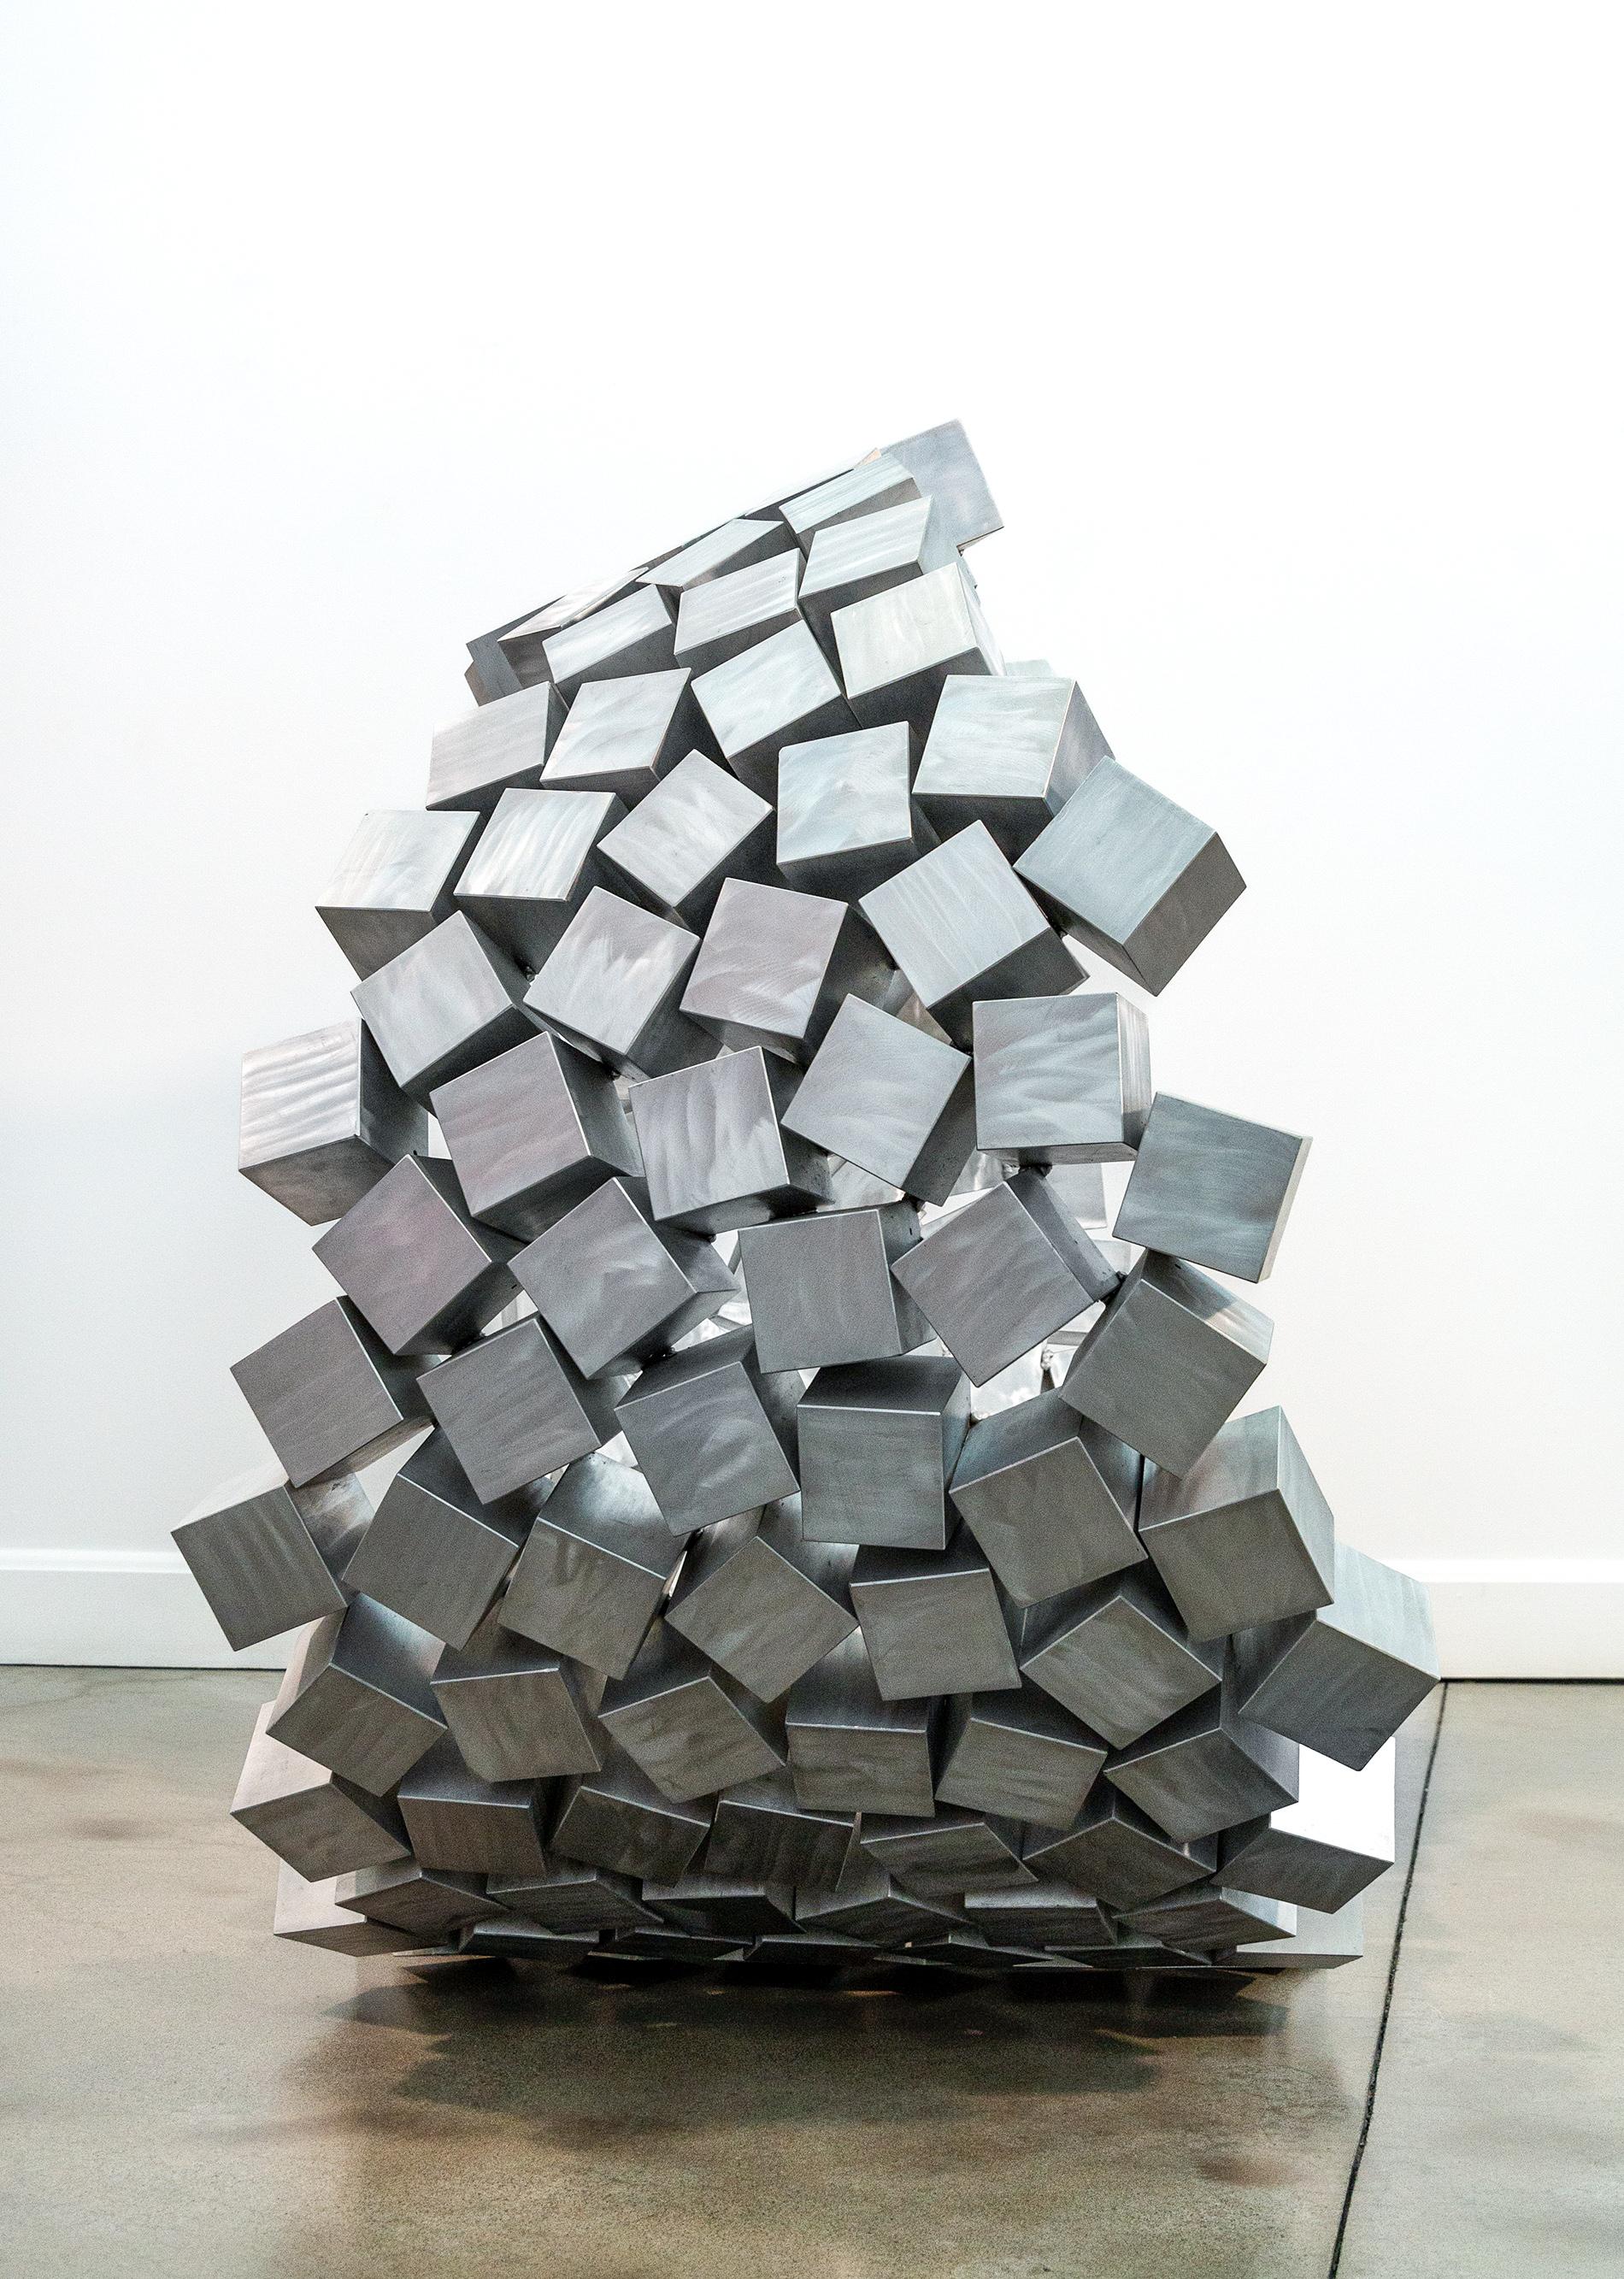 He has been called the ‘Light Sculptor.’ Quebec artist Jean-Pierre Morin is inspired by the light and shapes found in nature. The pleasing organic shape of this gorgeous sculpture is accentuated by the choice of material—highly polished cubes of